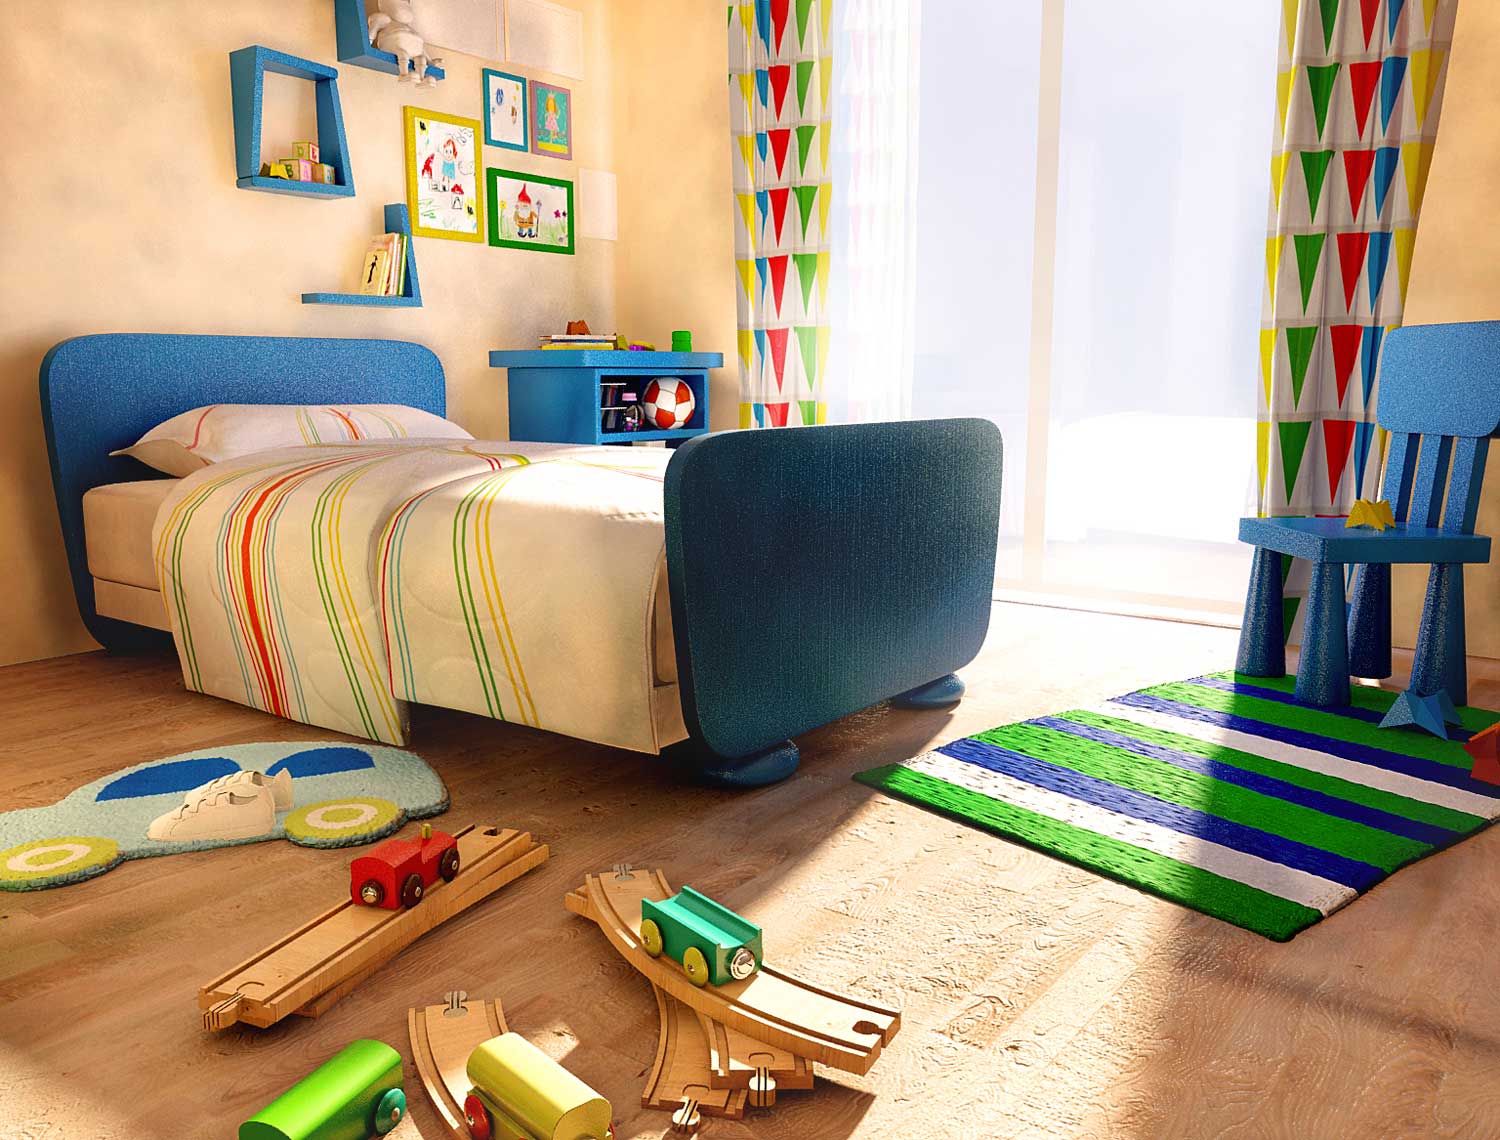 Contemporary Kids Kids Marvelous Contemporary Kids Bedroom Of Kids Chat Rooms With Single Bed On Blue Platform Furnished With Wall Cabinet Plus Completed With Chair On Striped Rug Kids Room Design And Furniture Of Kids Chat Rooms